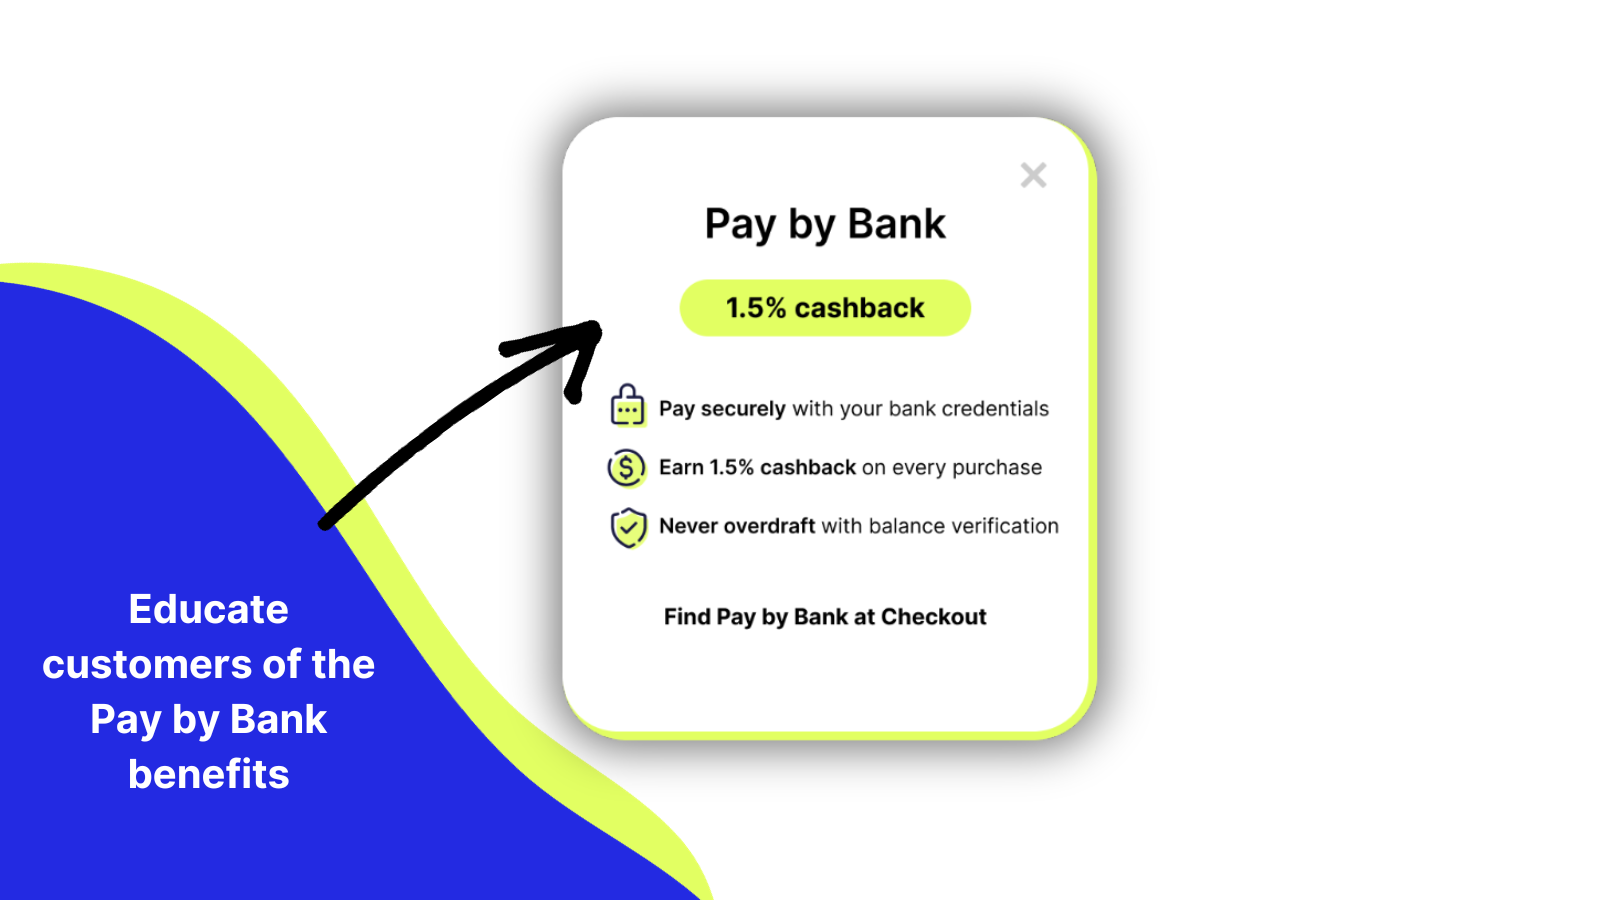 Pay by Bank pop-up to inform customers of benefits